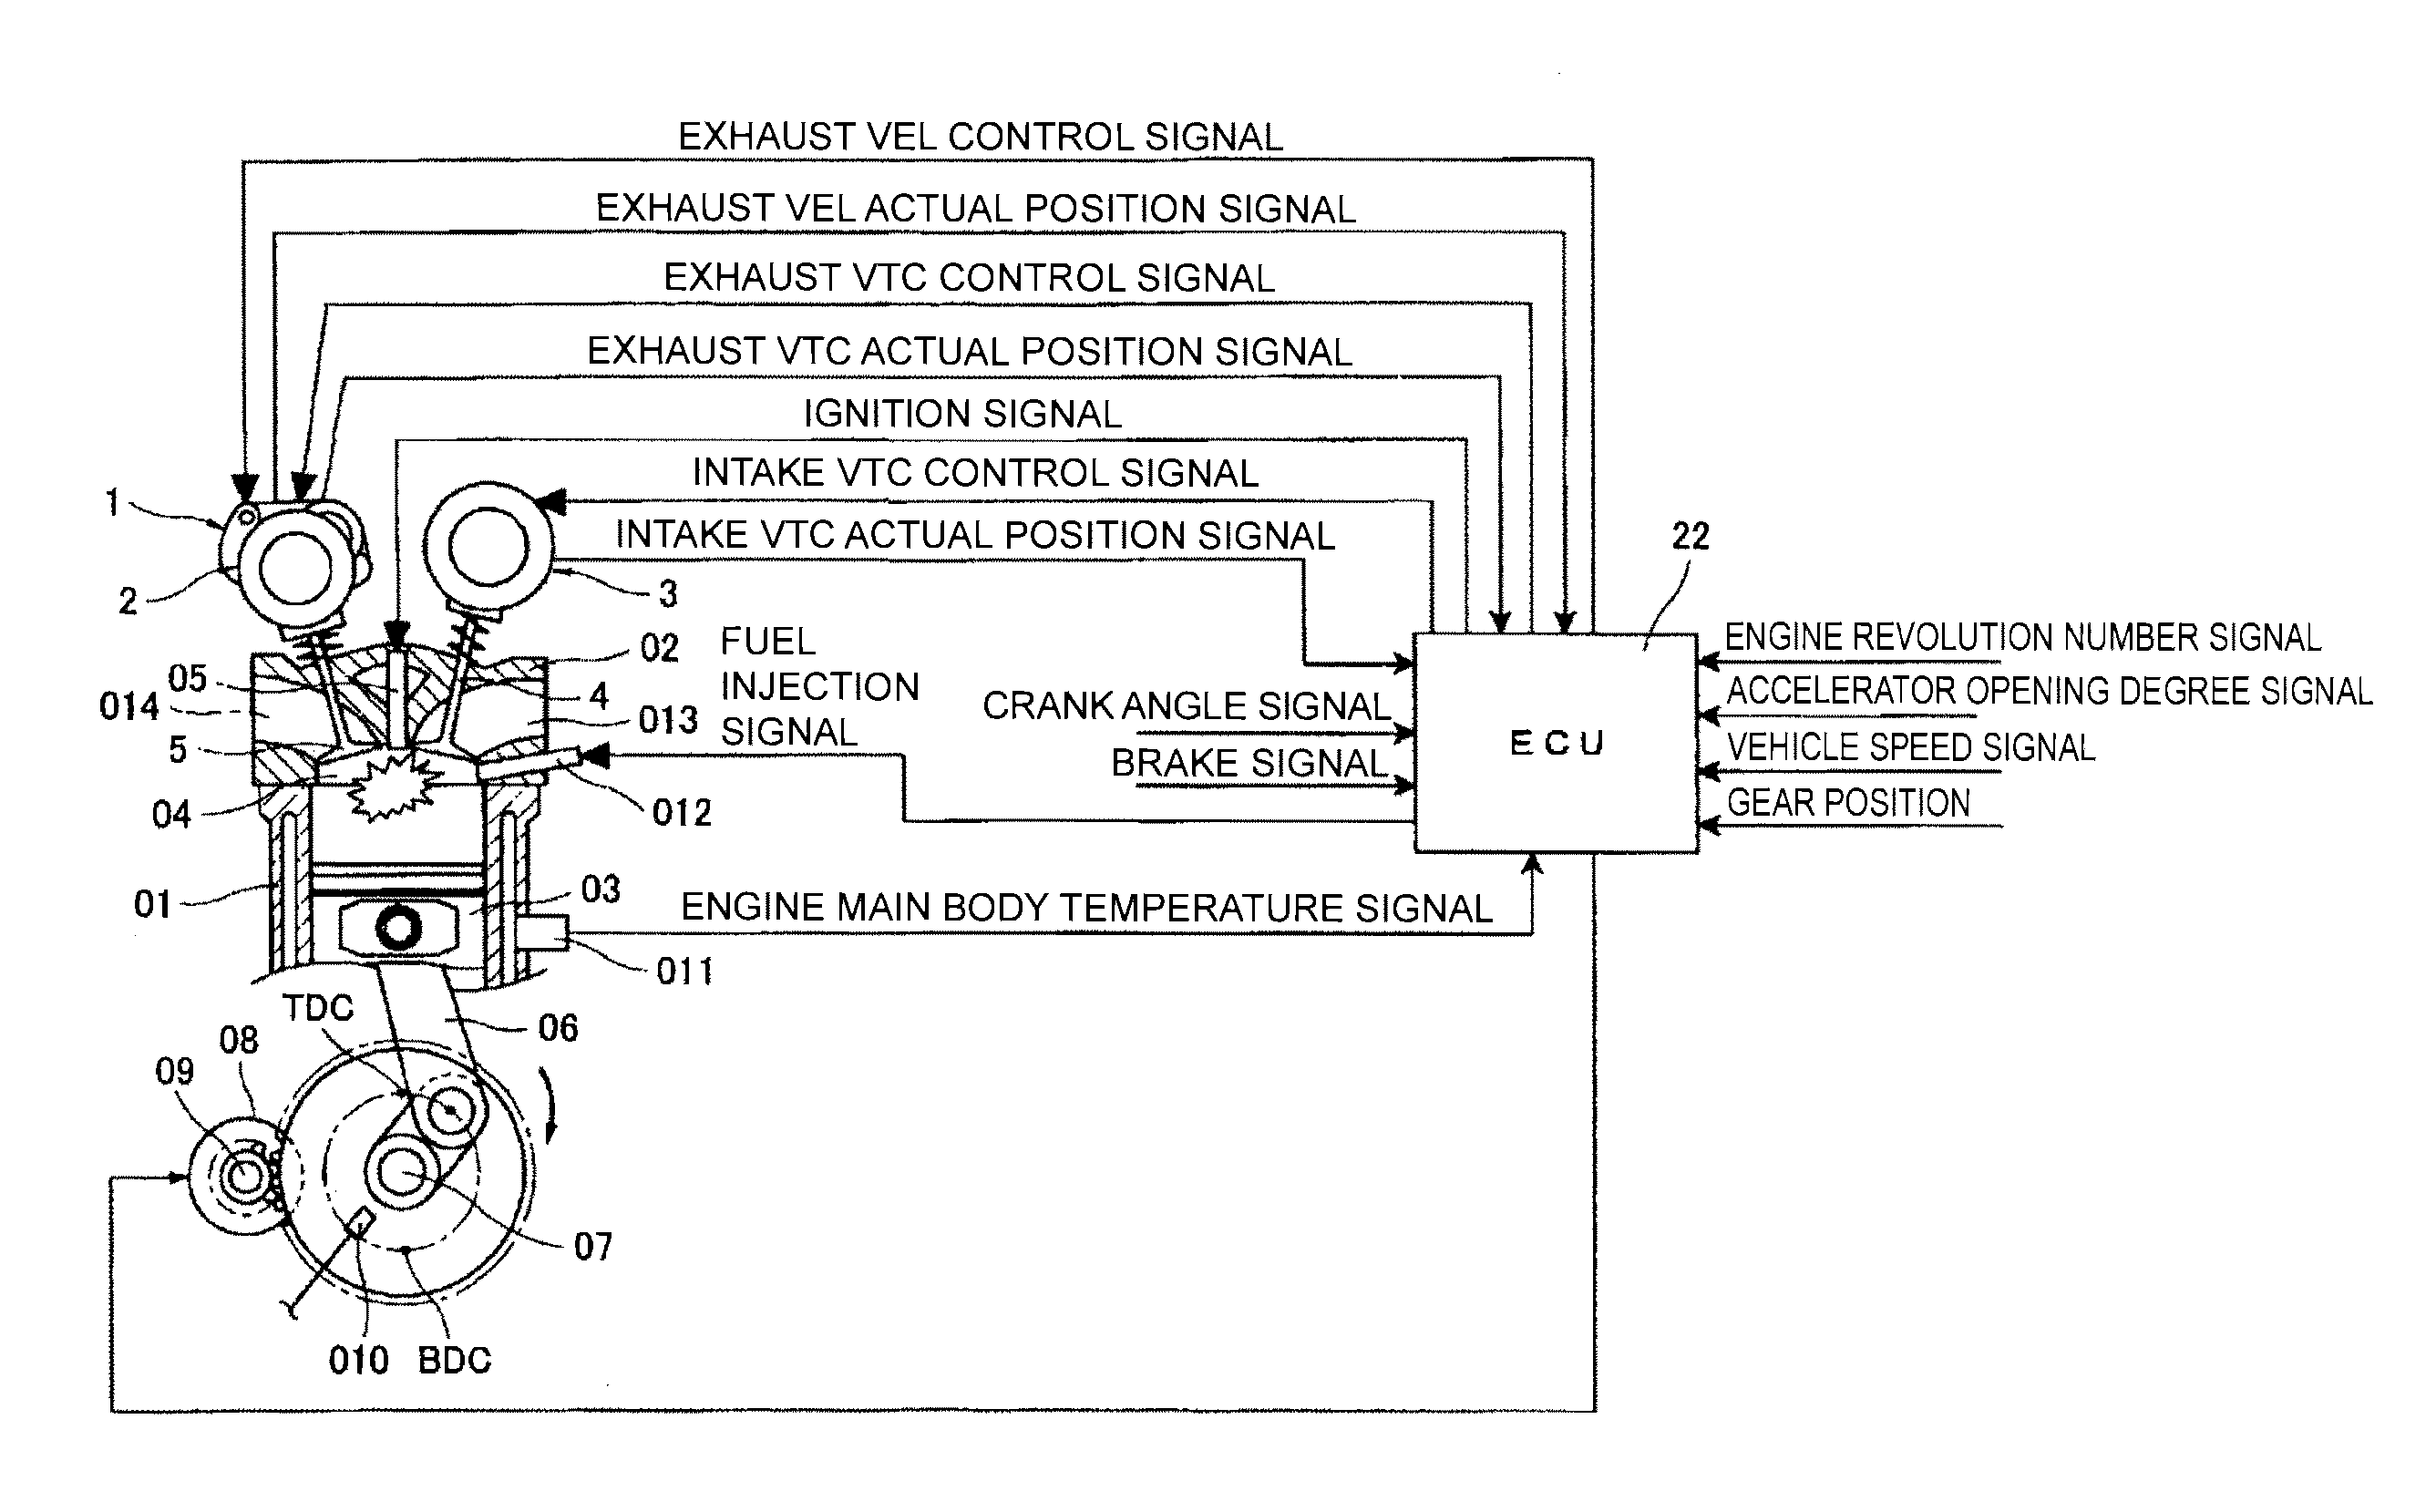 Automatic stop/restart control system for an internal combustion engine and variable valve actuating apparatus